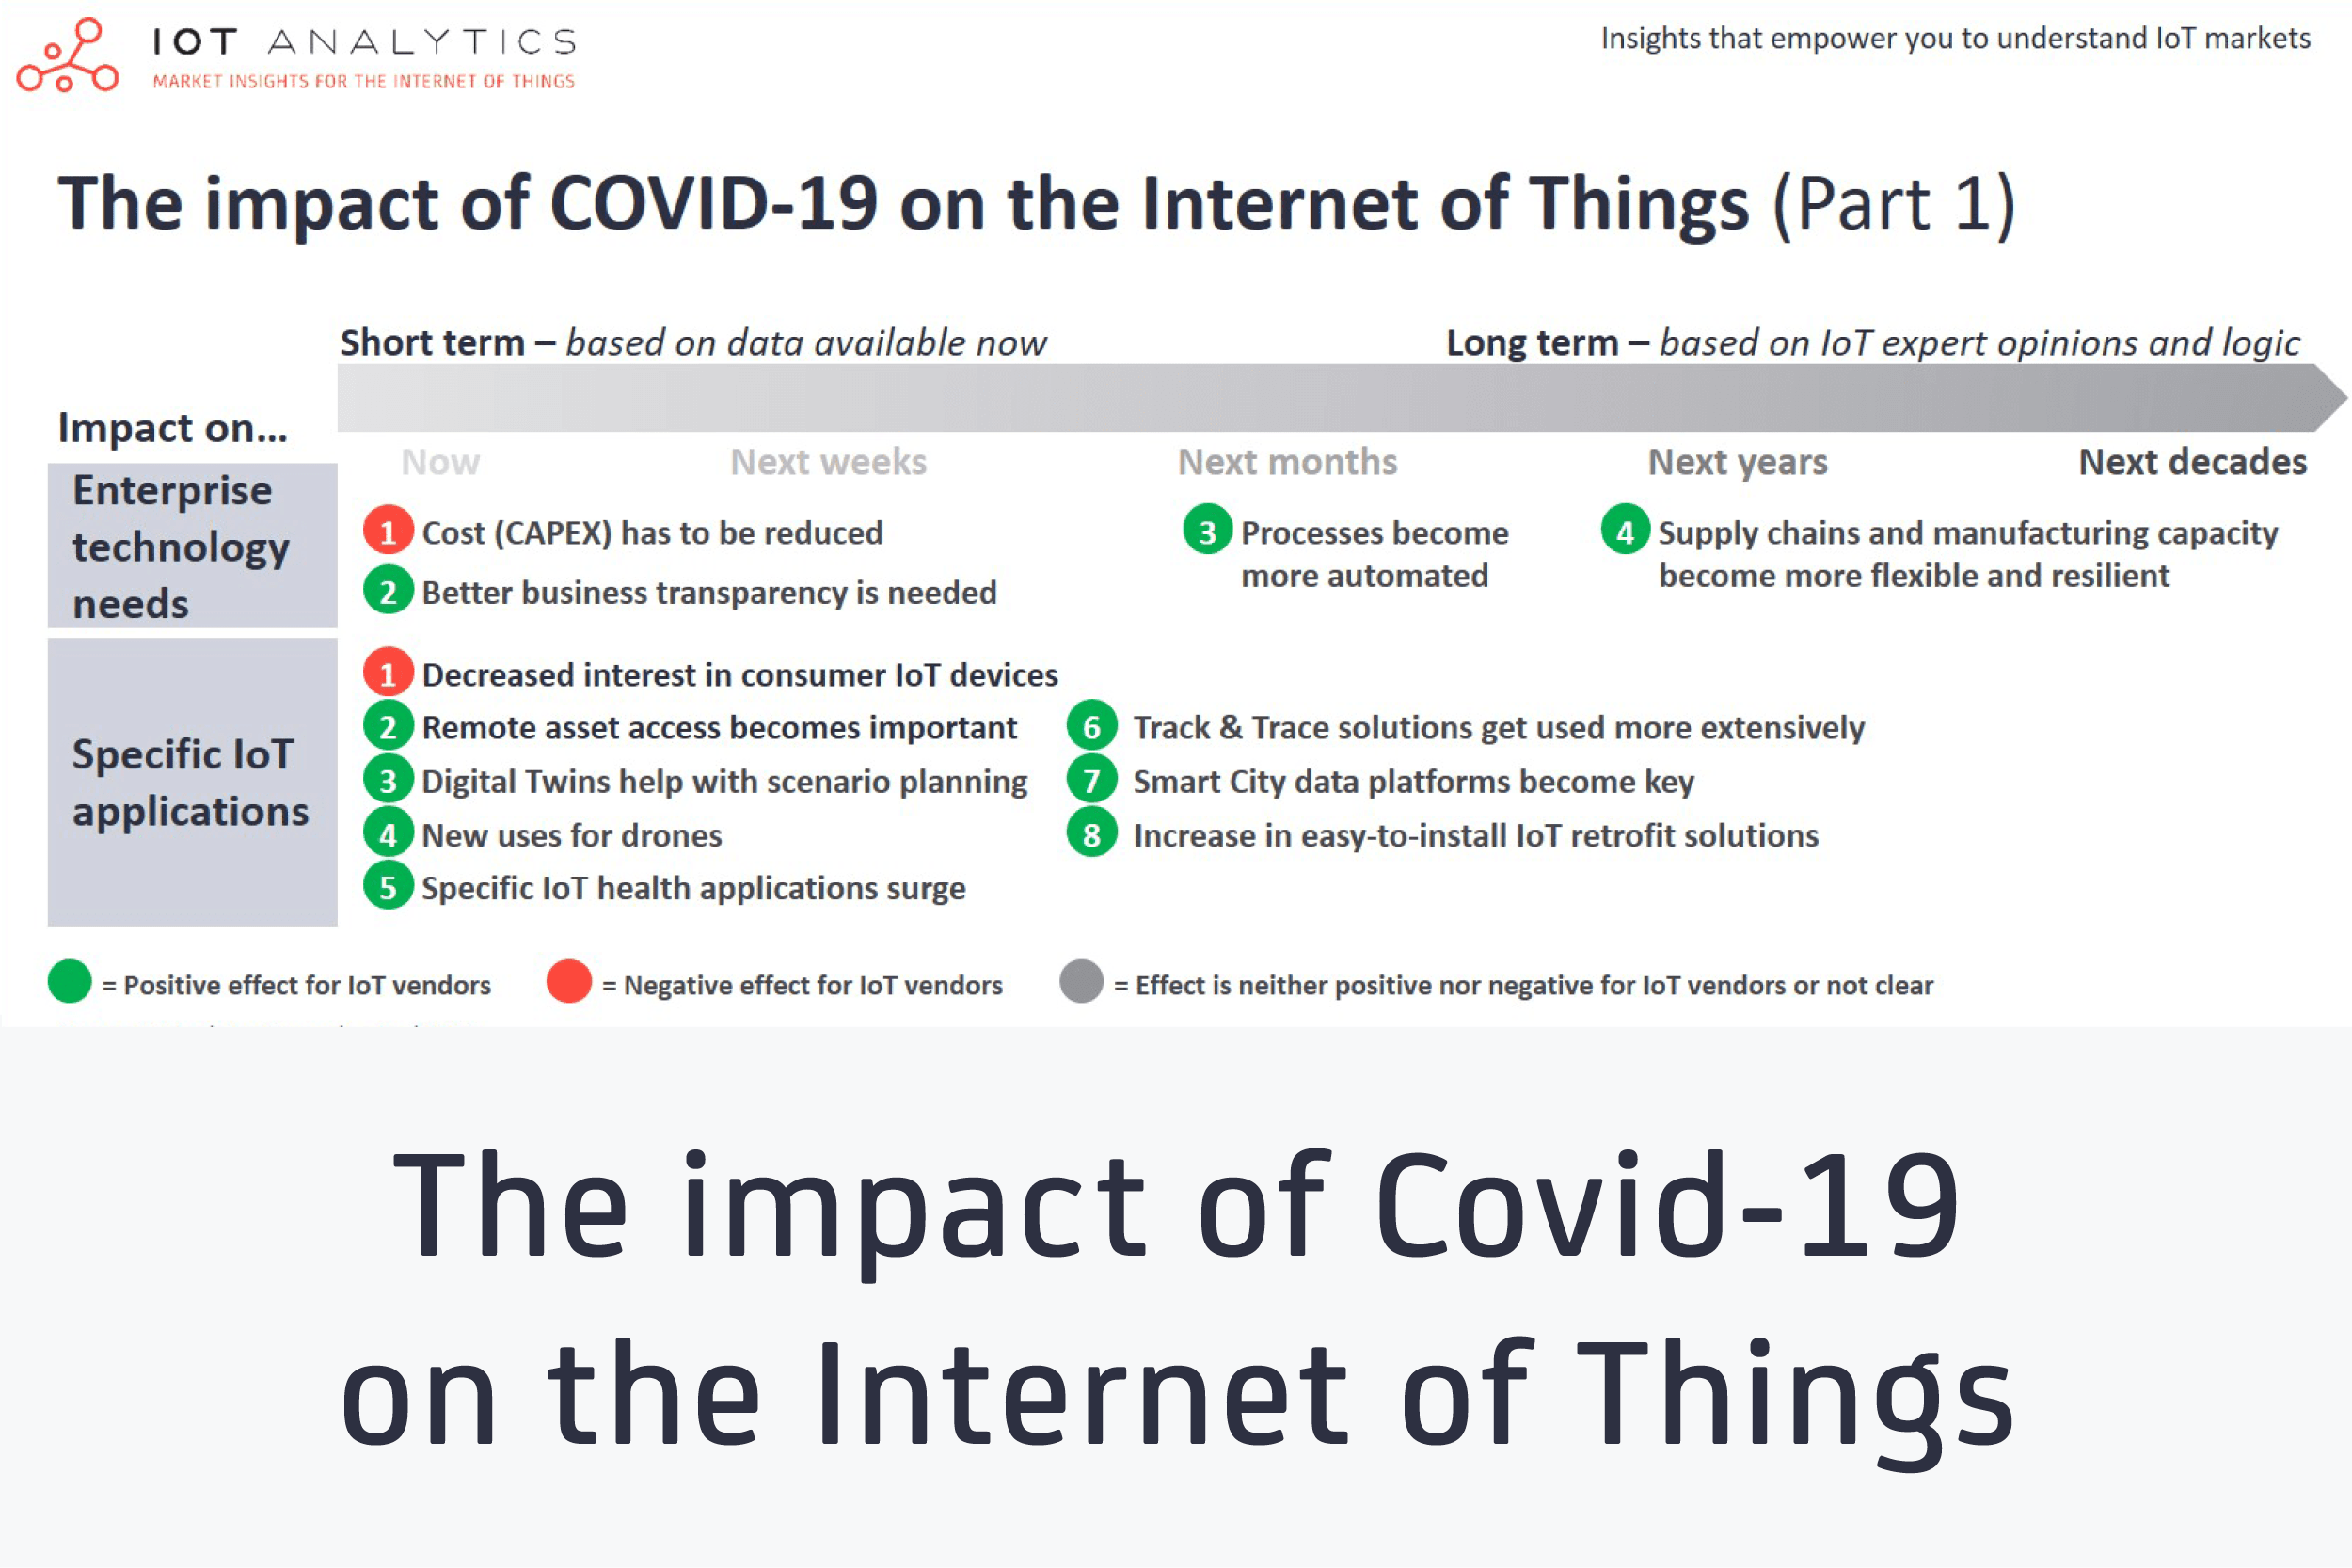 The impact of Covid-19 on the Internet of Things - featured image